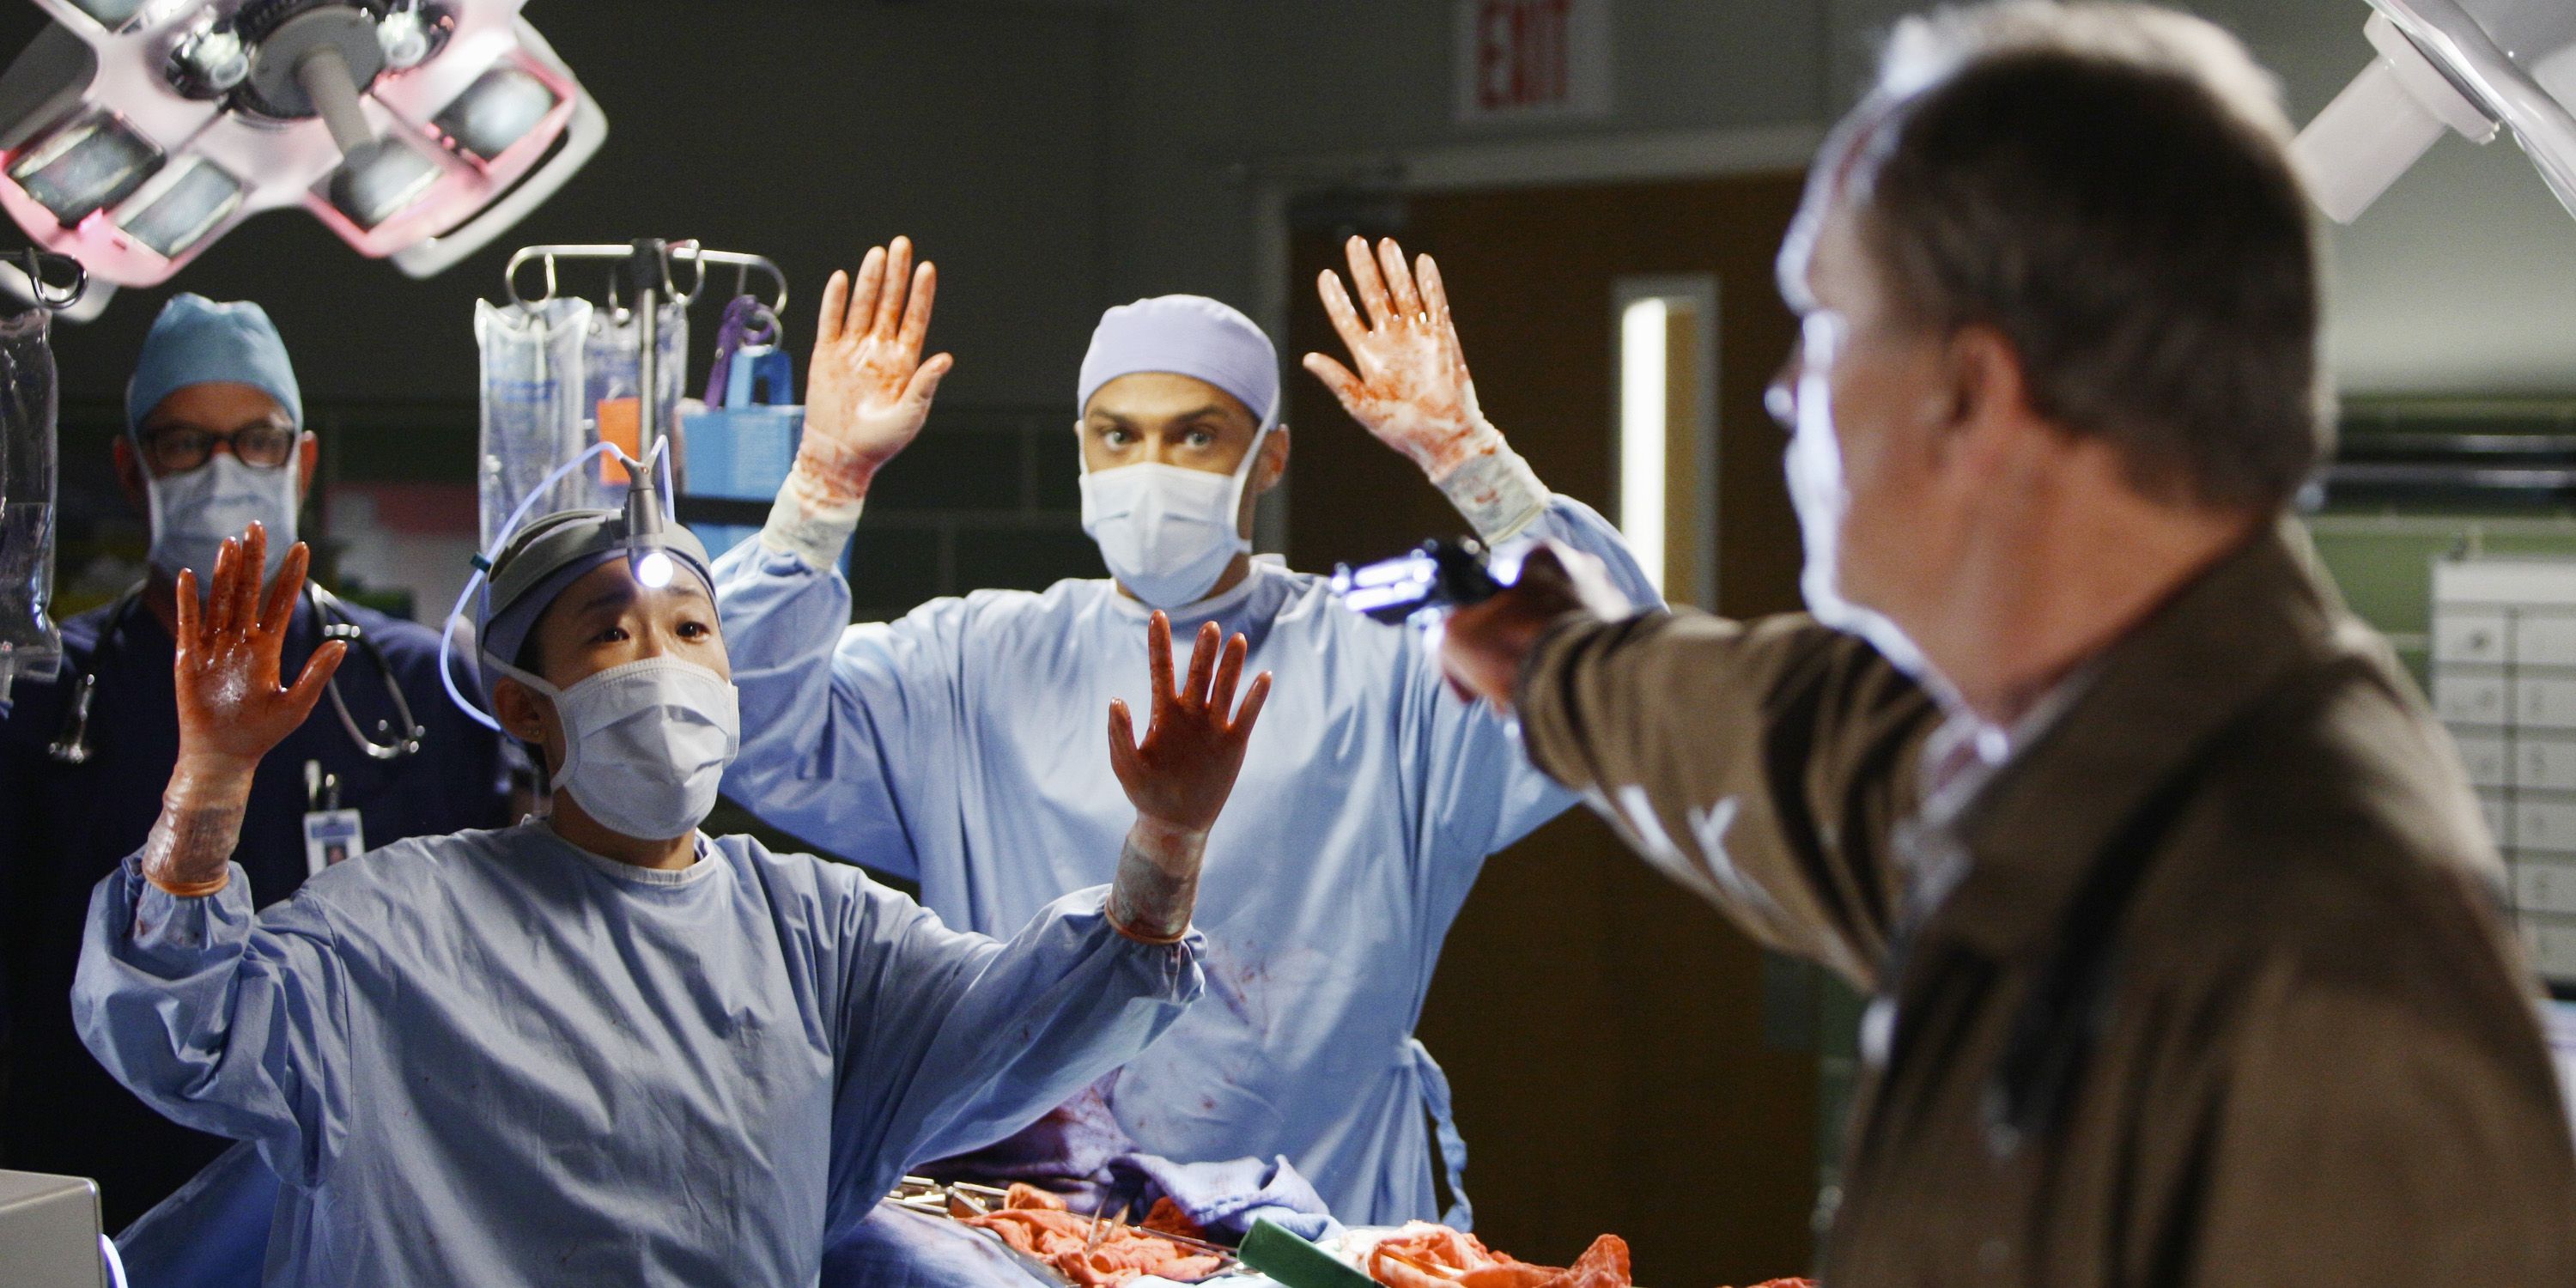 Cristina and Jackson during shooting incident with Clark wielding gun in Greys